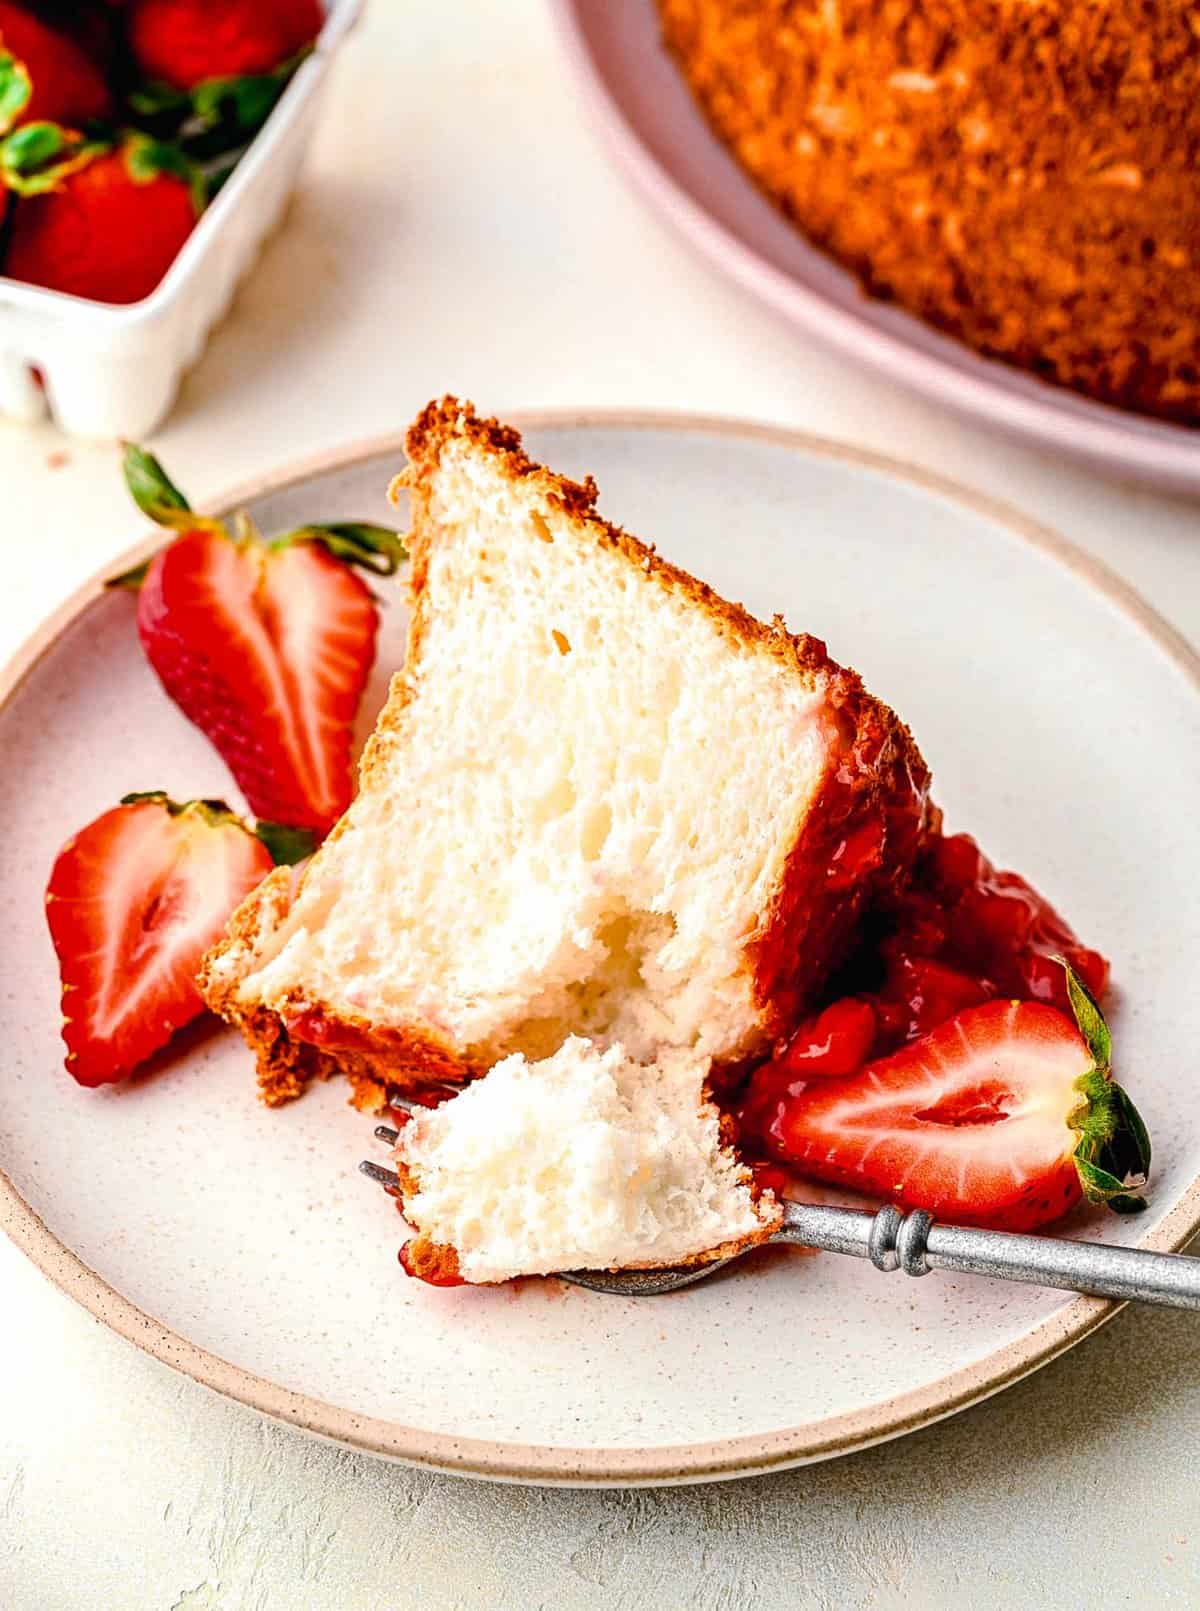 A slice of strawberry angel food cake on a plate with fresh strawberries and a fork taking a bite out of it.